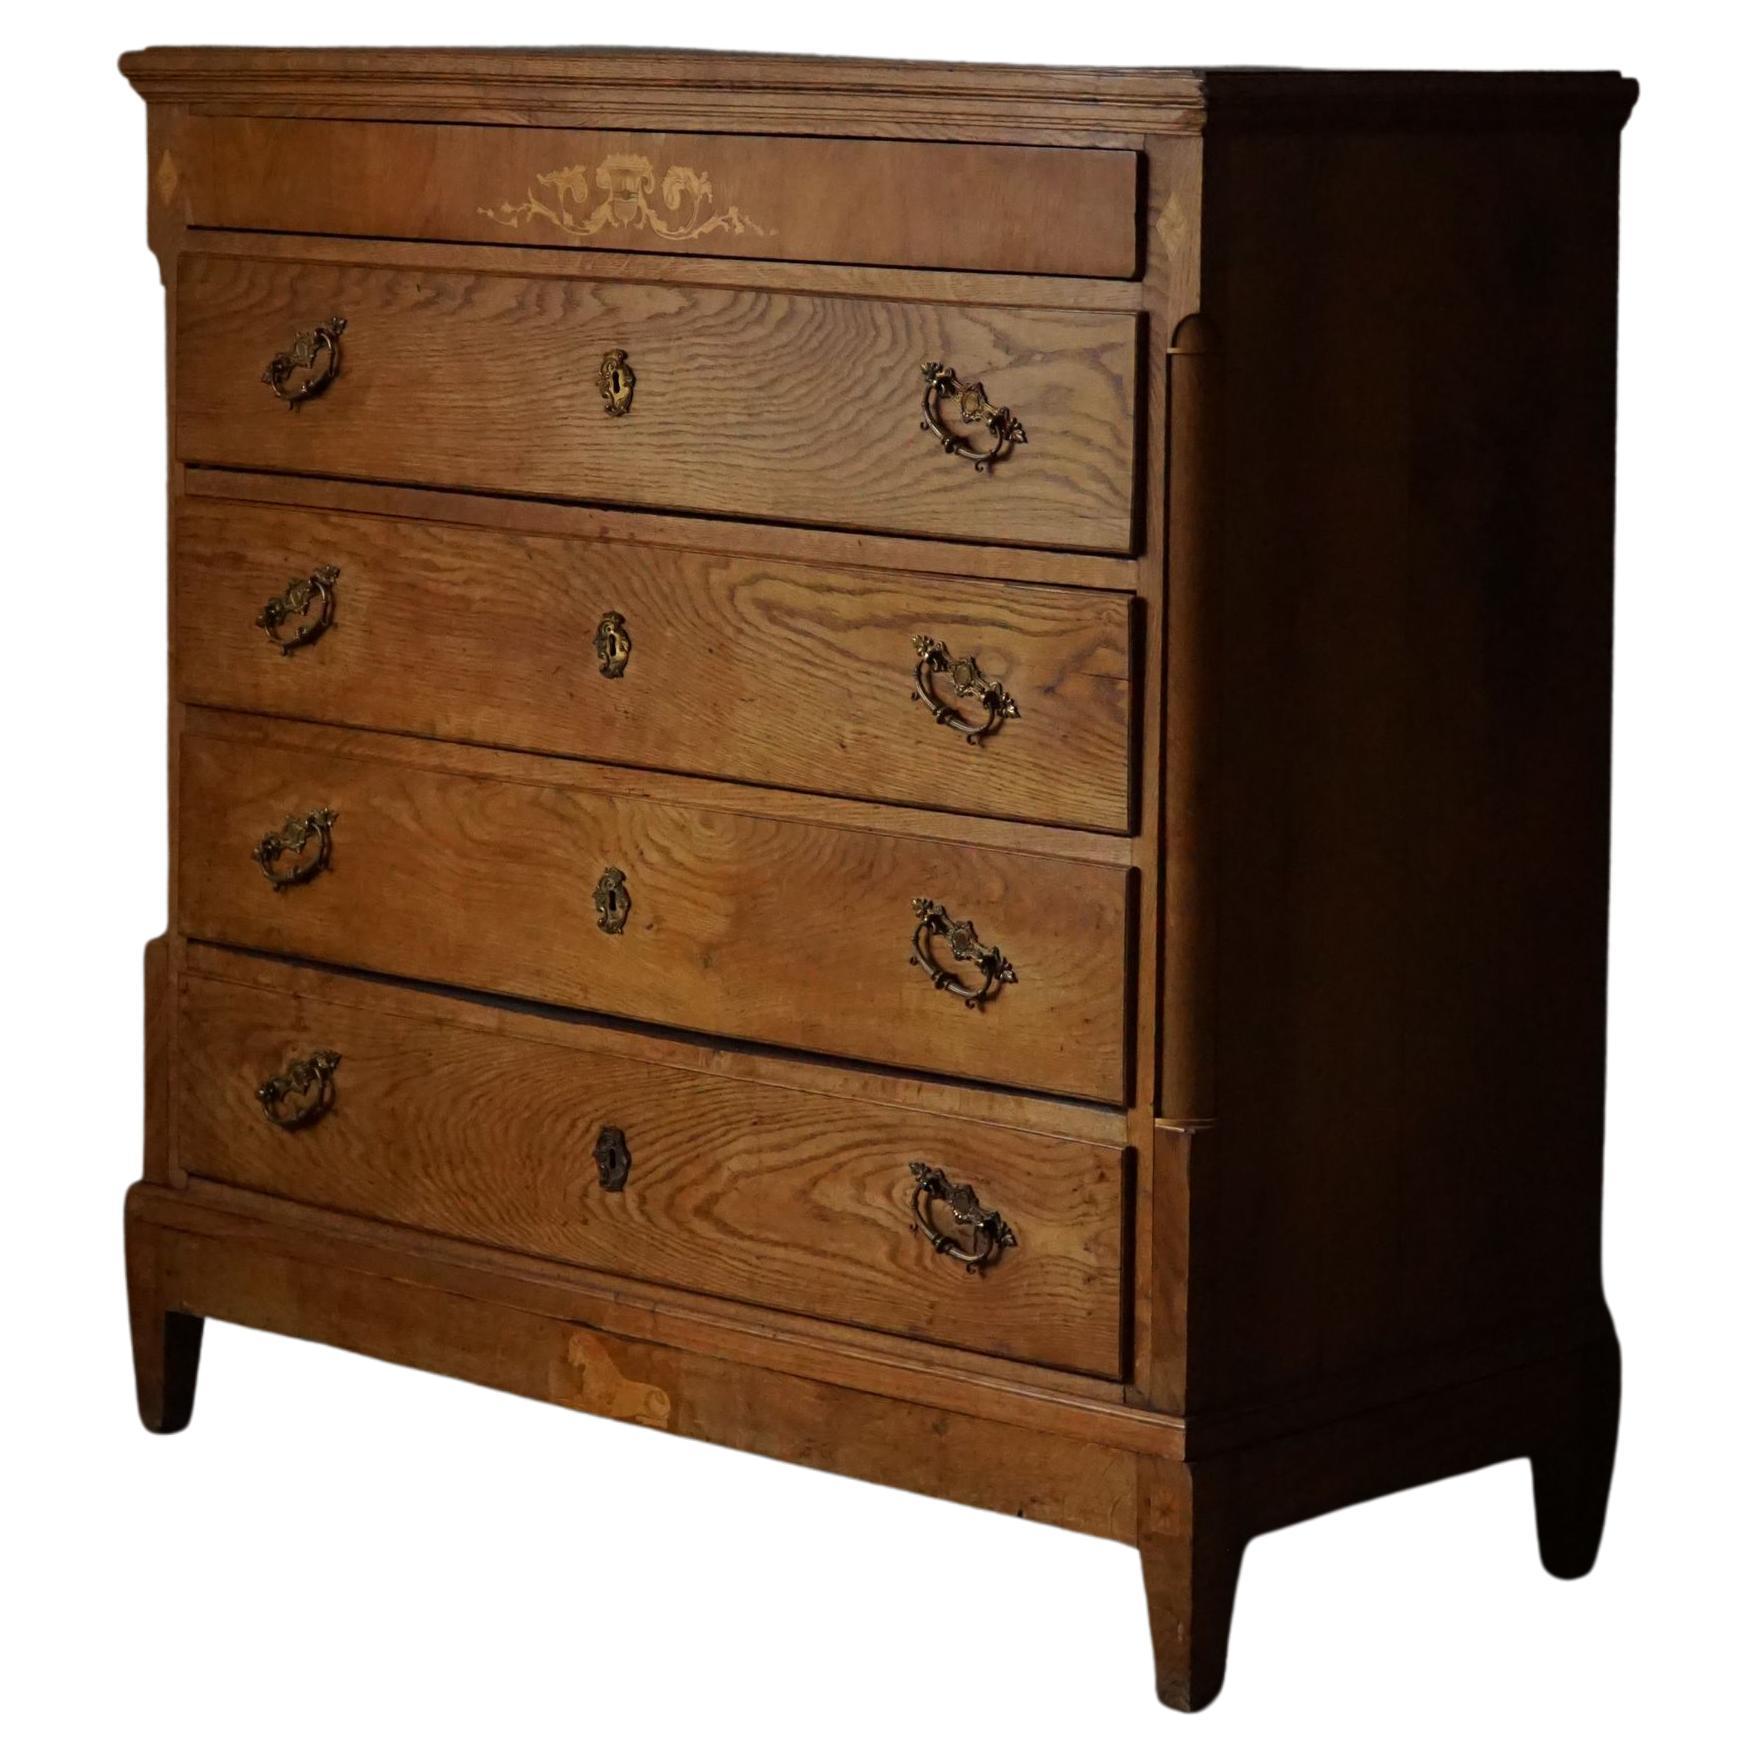 Antique Danish Chest of Drawers in Oak, Made in Late 18th Century, Louis 16